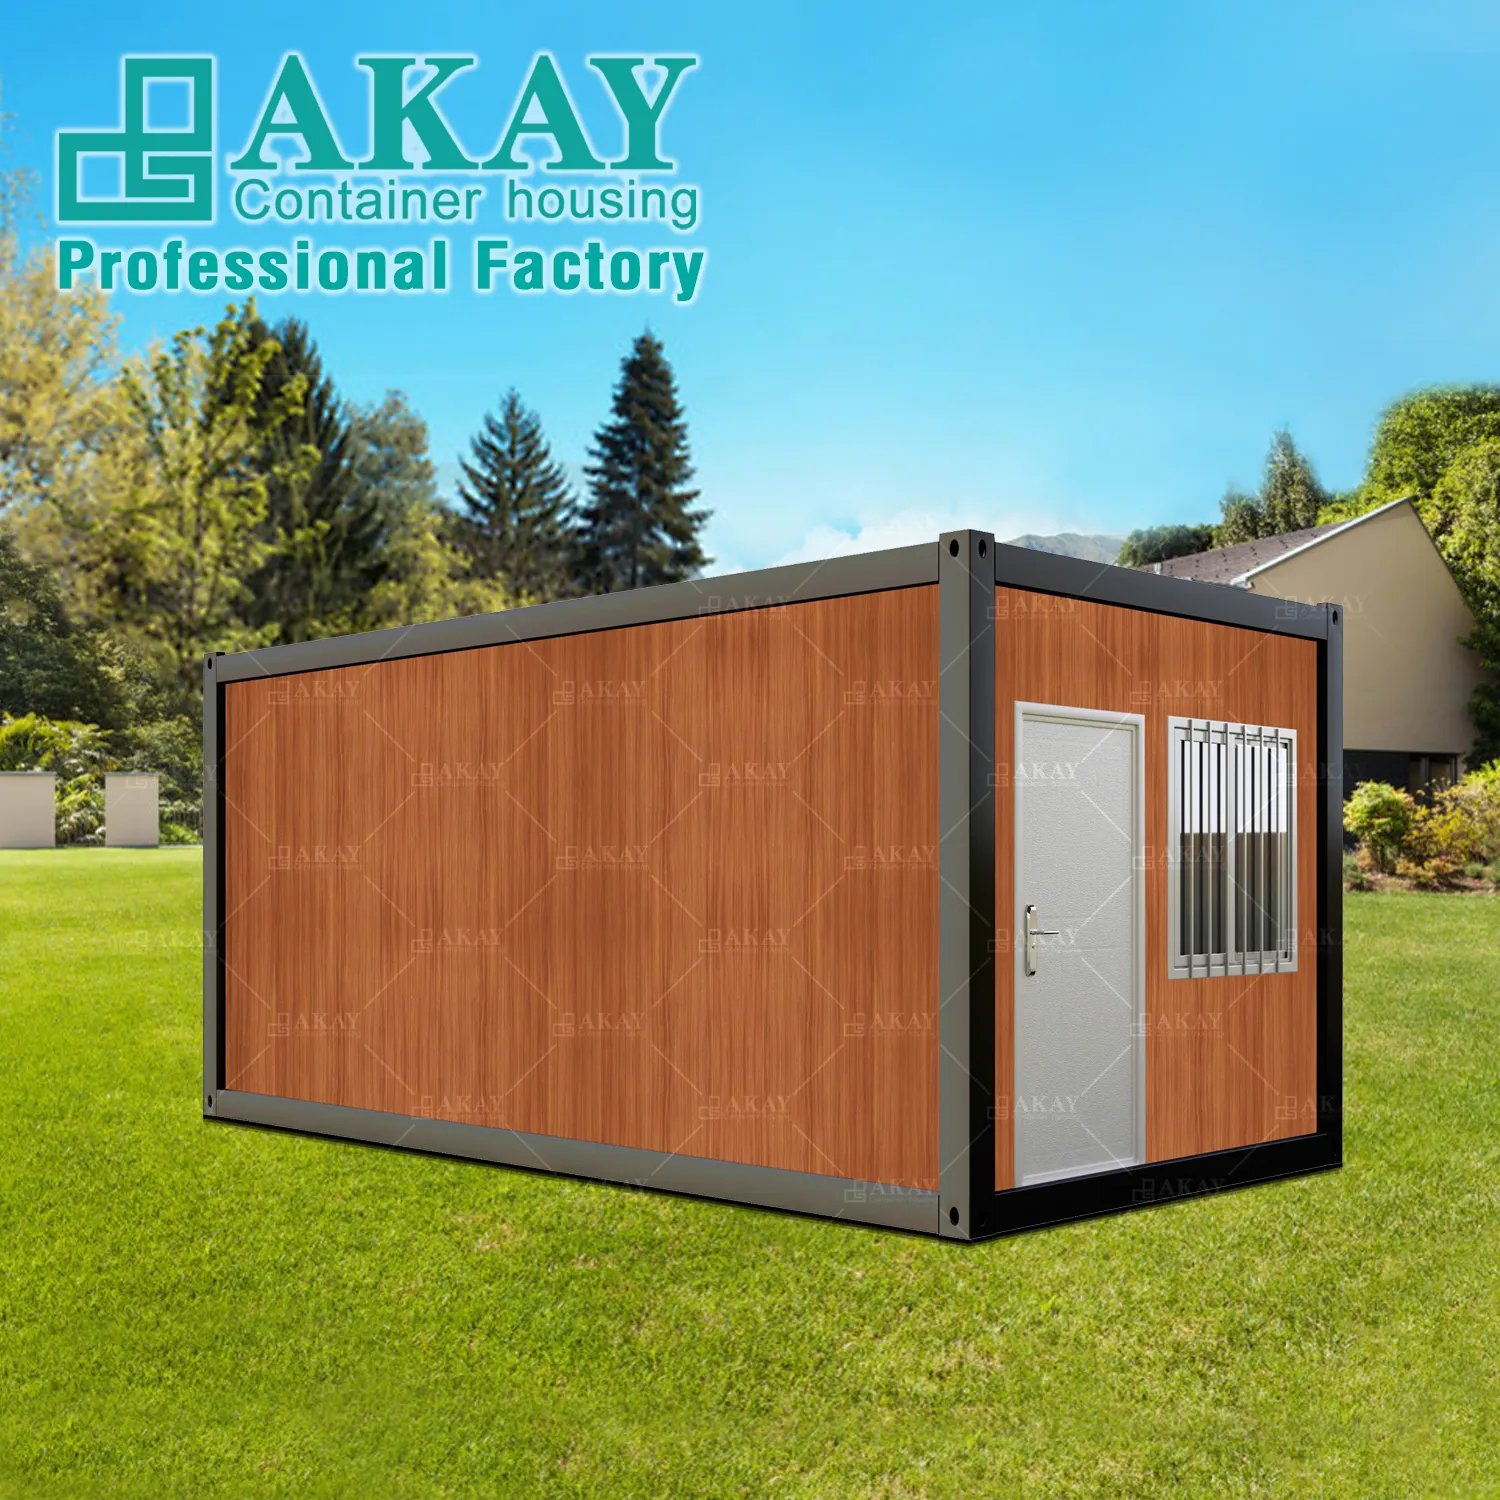 Well designed water hurricane proof container homes with modern cladding and interior finish, eco-friendly folding modular home